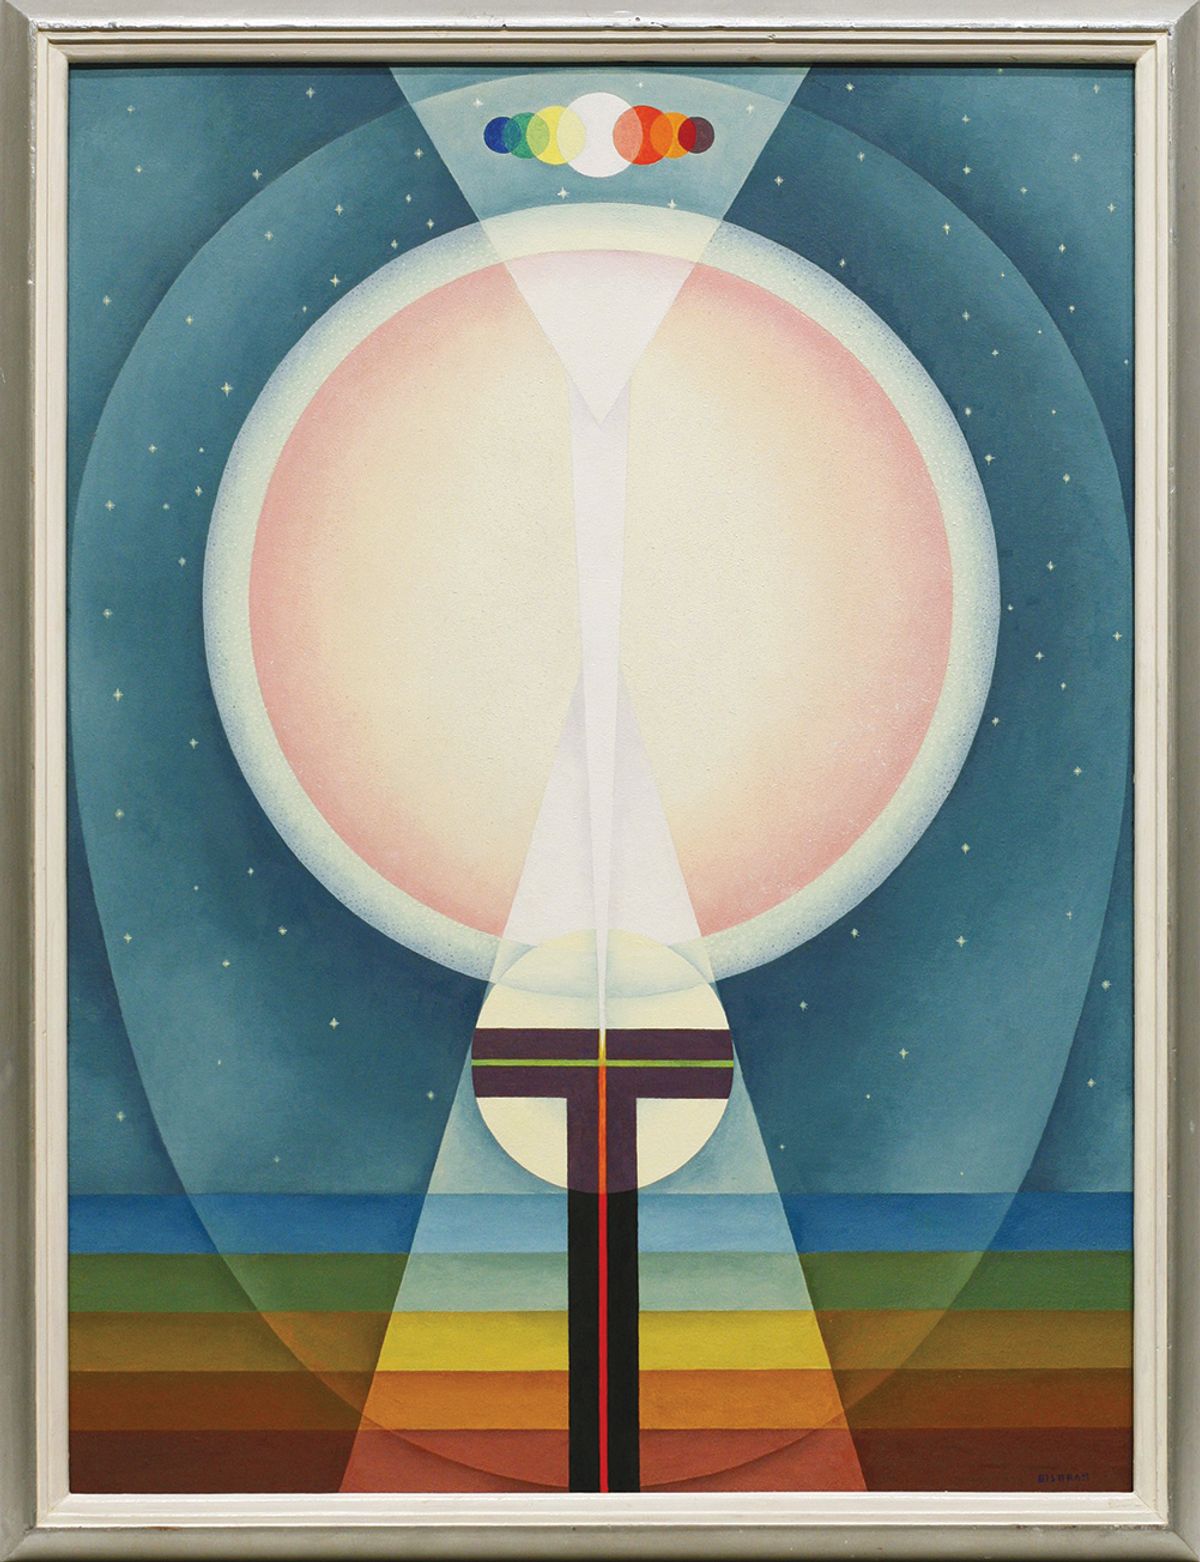 Emil Bisttram’s Oversoul (around 1941); the US artist was a key influence on the short-lived Transcendental Painting Group Courtesy of Michael Rosenfeld Gallery, New York